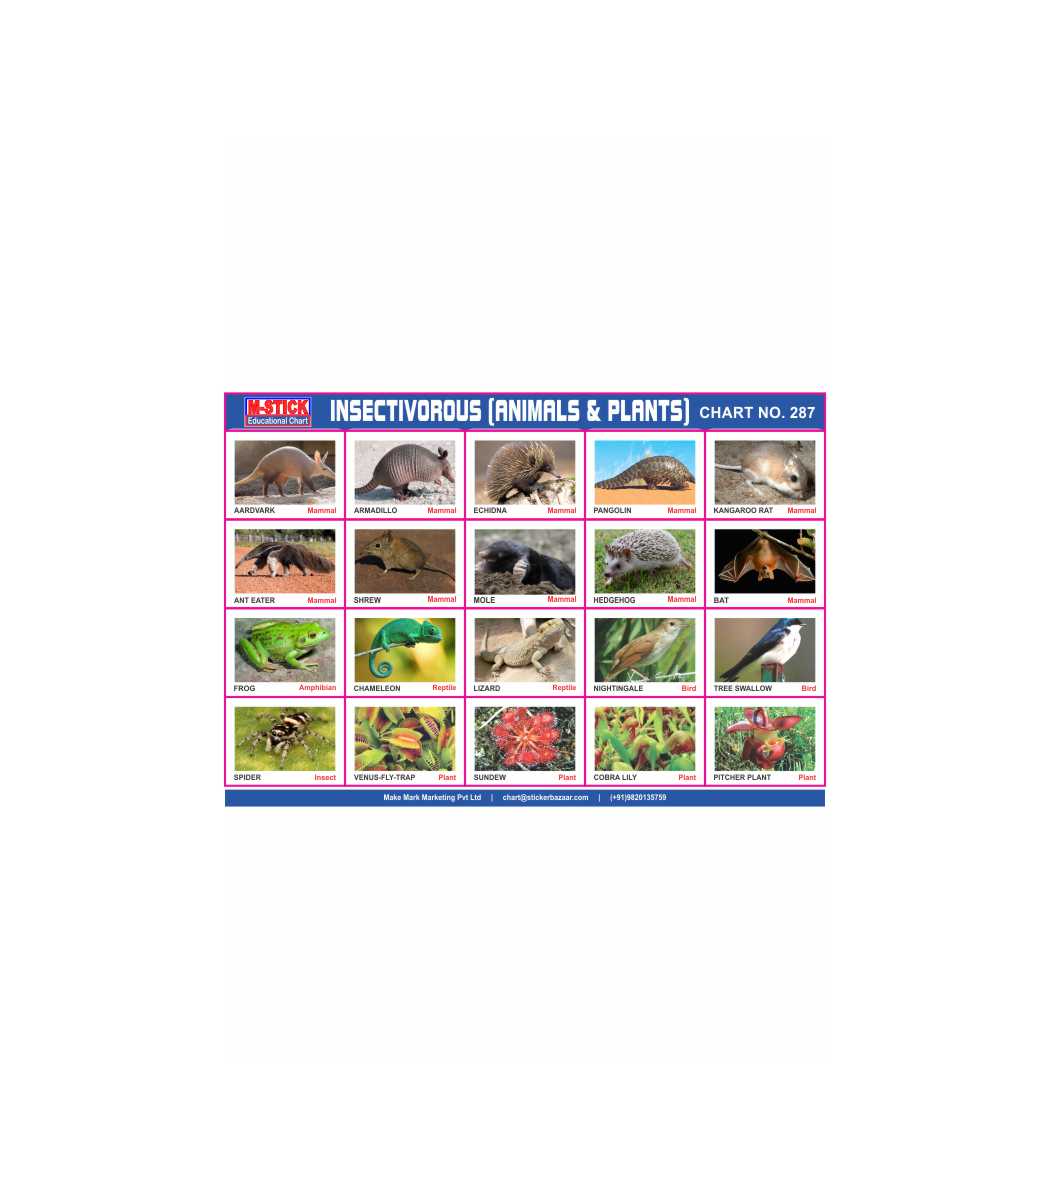 M-Stick Educational Chart 287 Insectivorous ( Animals & Plants )